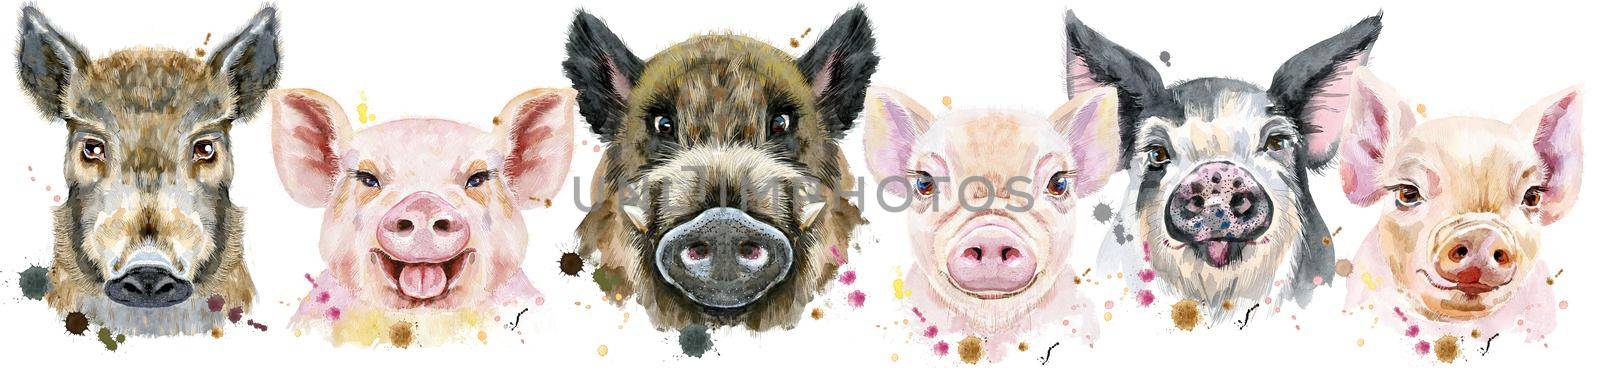 Border from pigs. Watercolor portraits of pigs and boars by NataOmsk